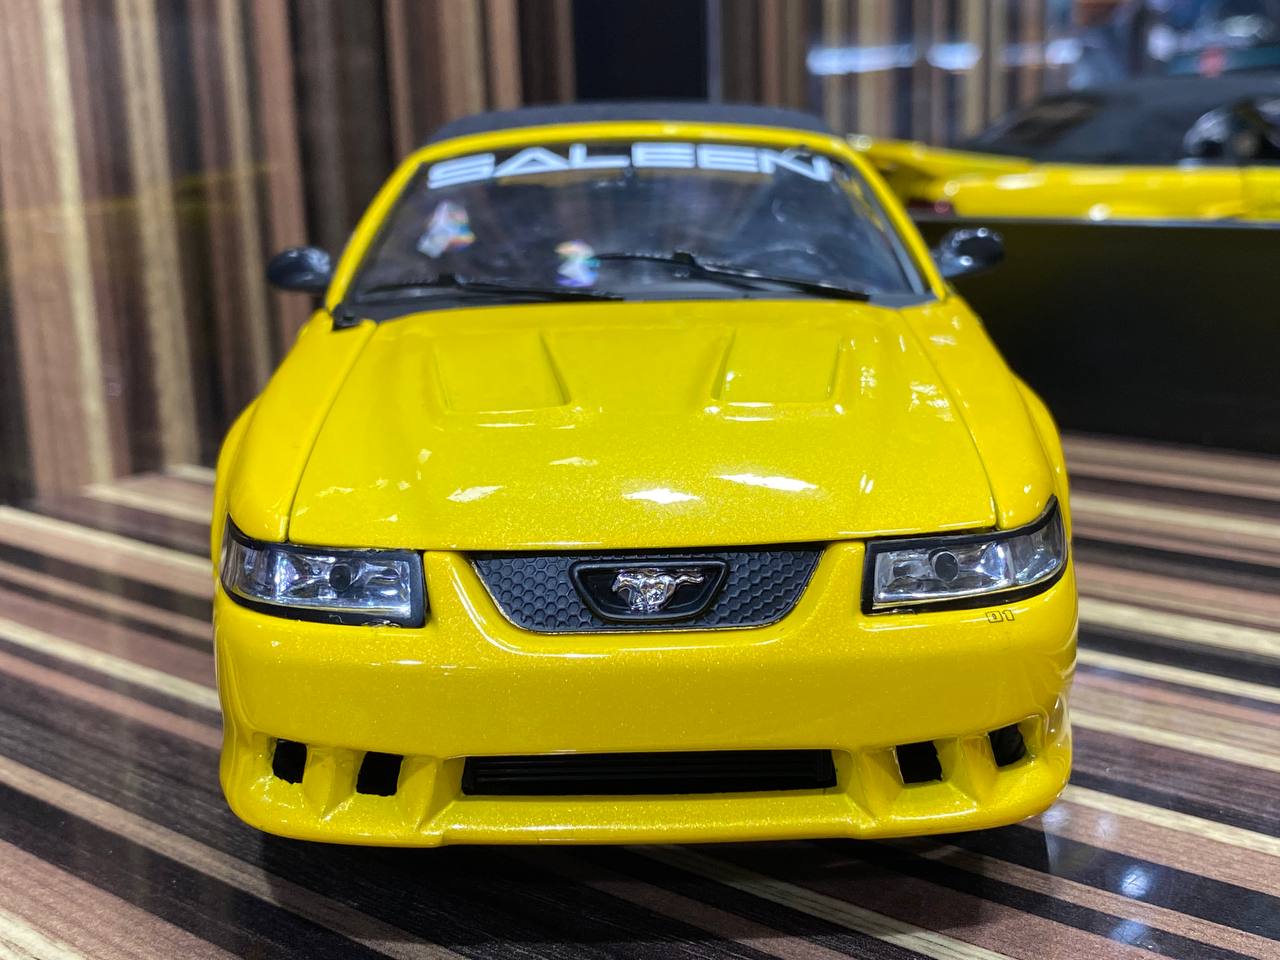 Ford Saleen Mustang S281 2003 Yellow Model Car by Joy Ride | 1/18 Diecast